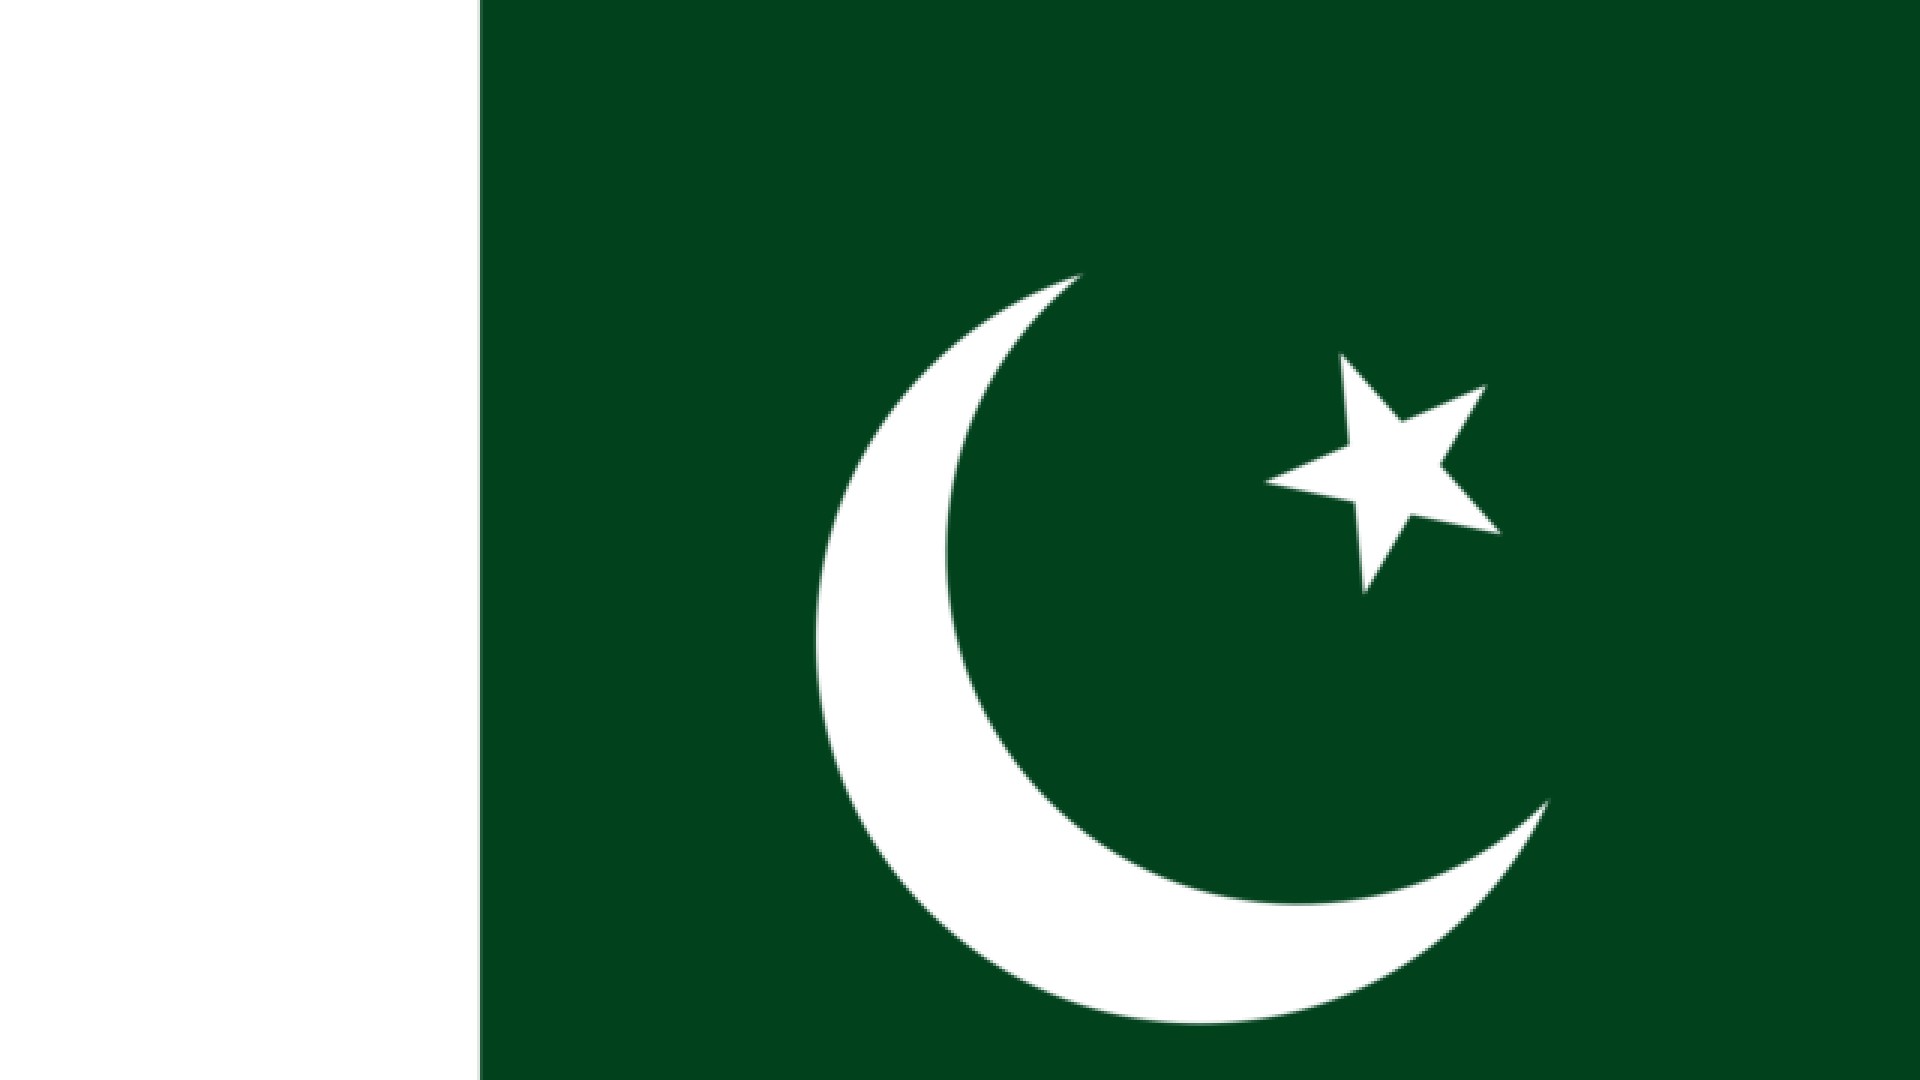 An image of the flag of Pakistan